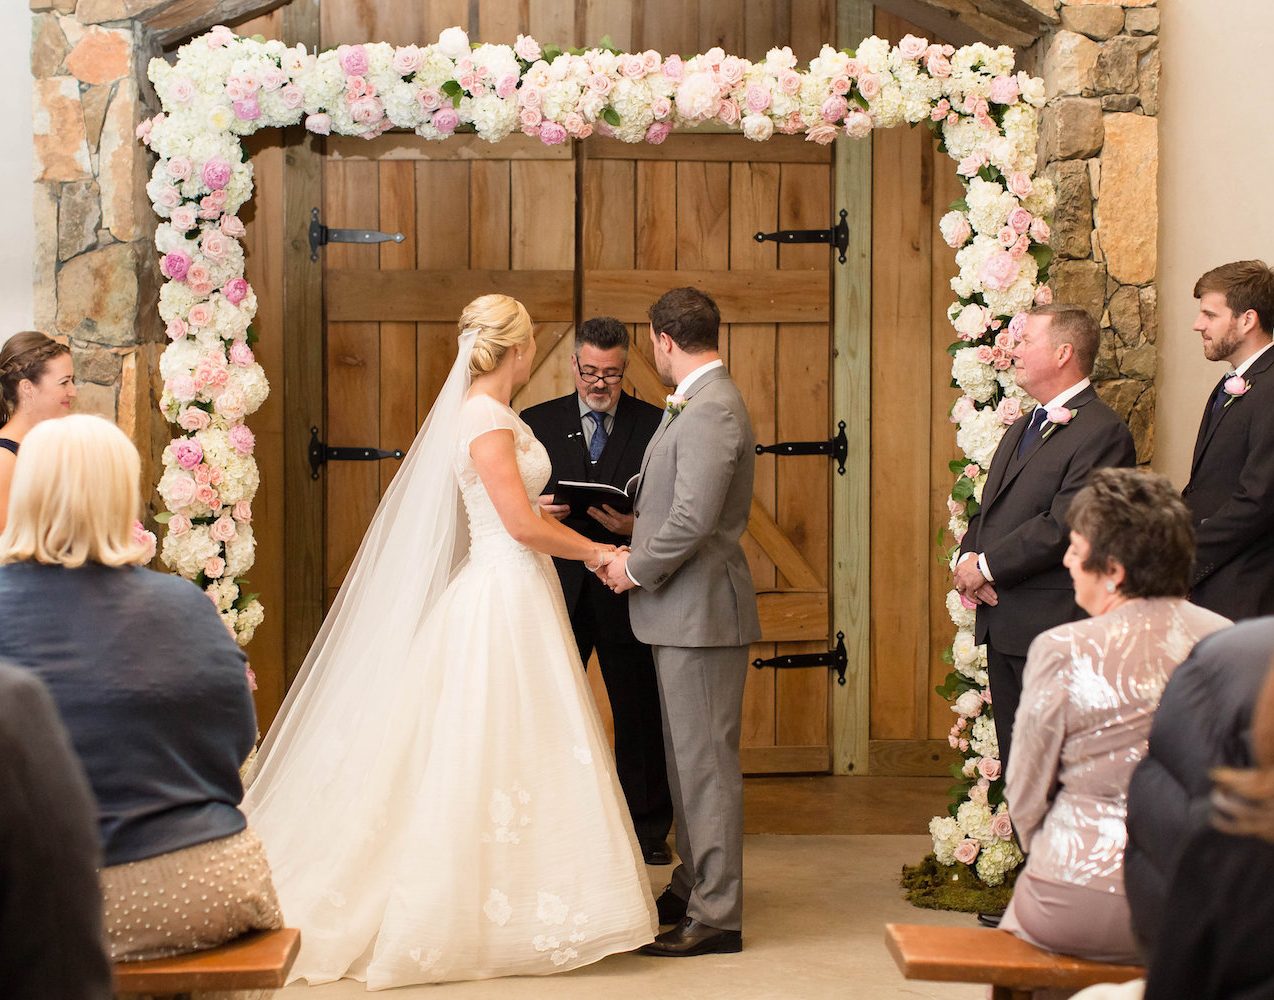 Stone Tower Wedding with full floral arch. Photography by Candice Adelle.